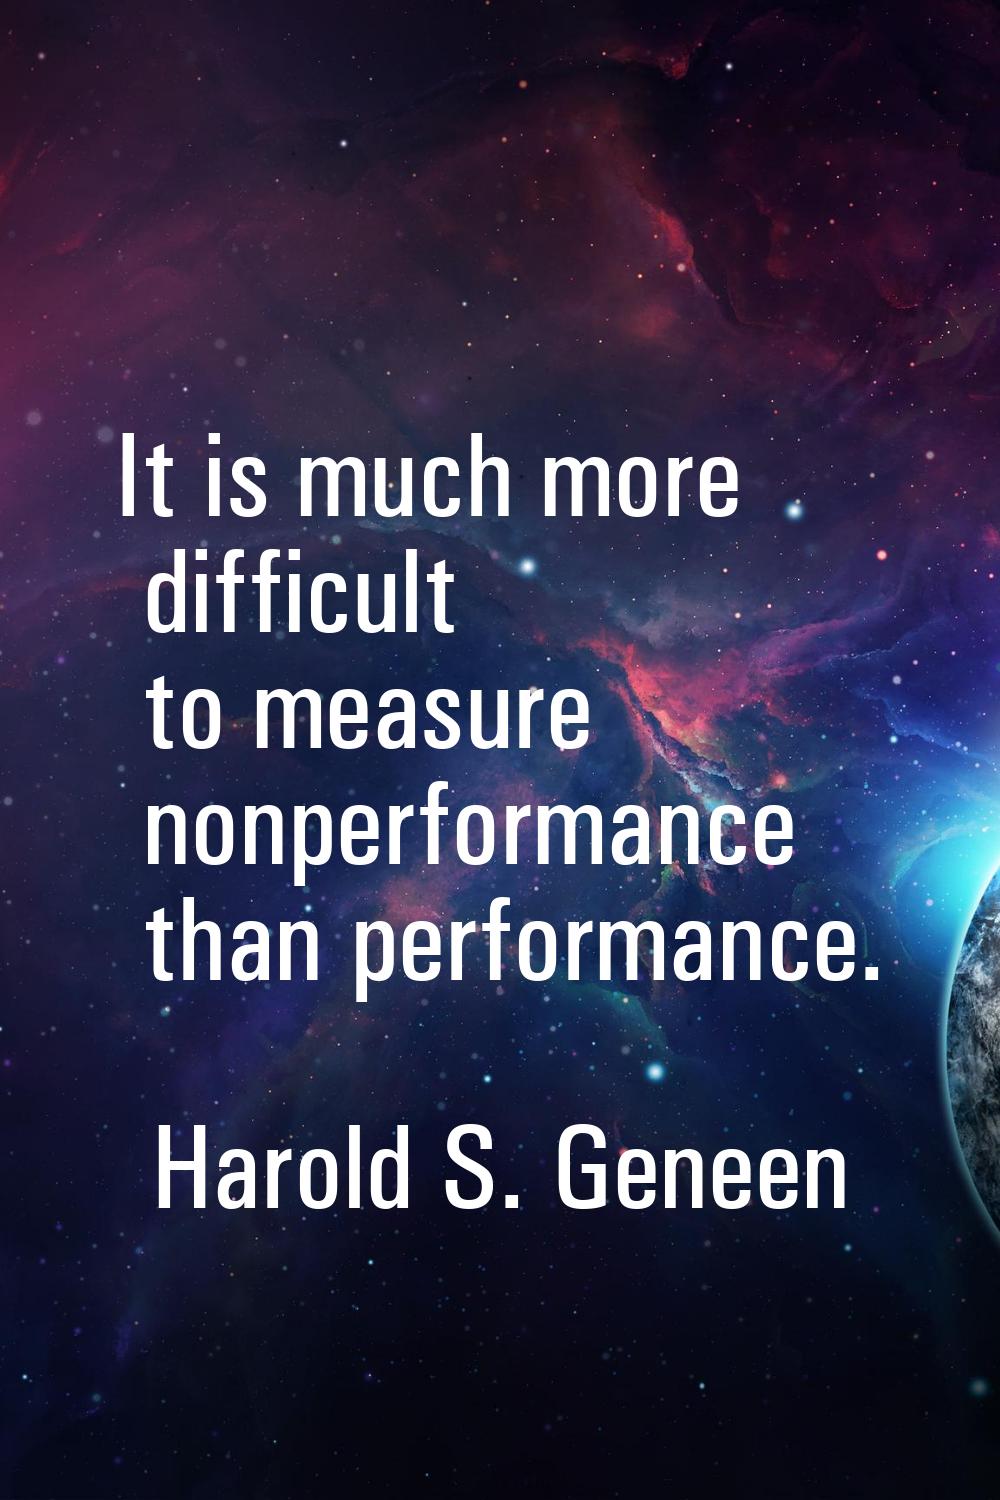 It is much more difficult to measure nonperformance than performance.